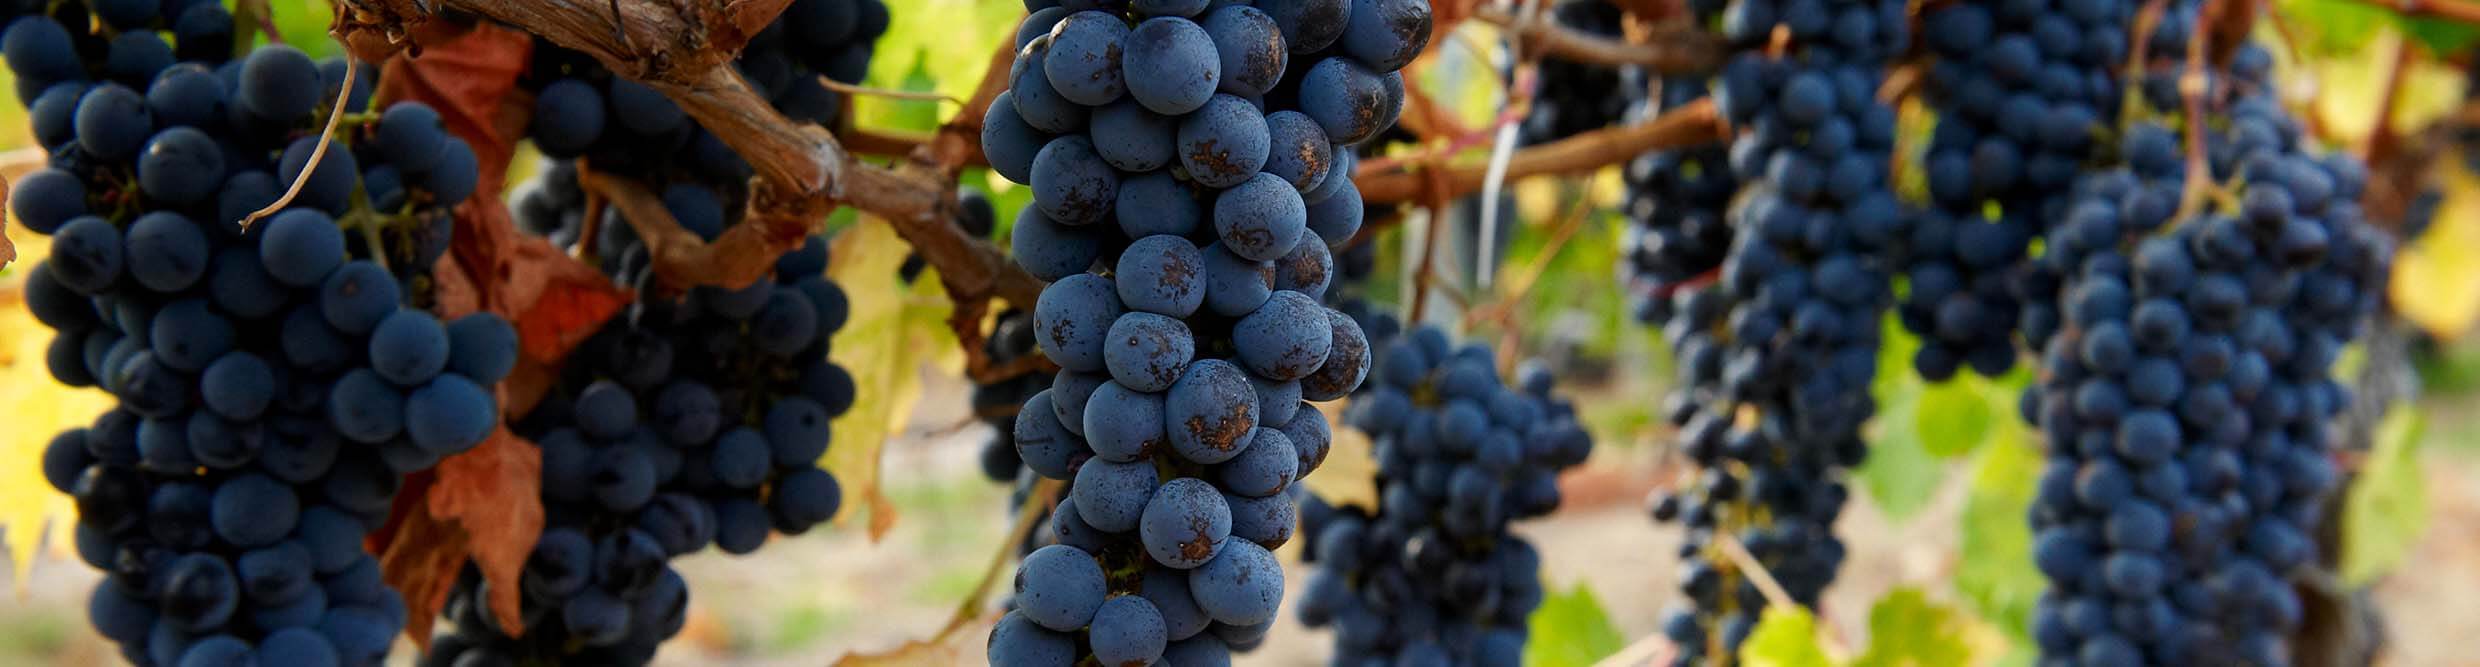 close up of rich dark blue ripe grapes hanging on a vine